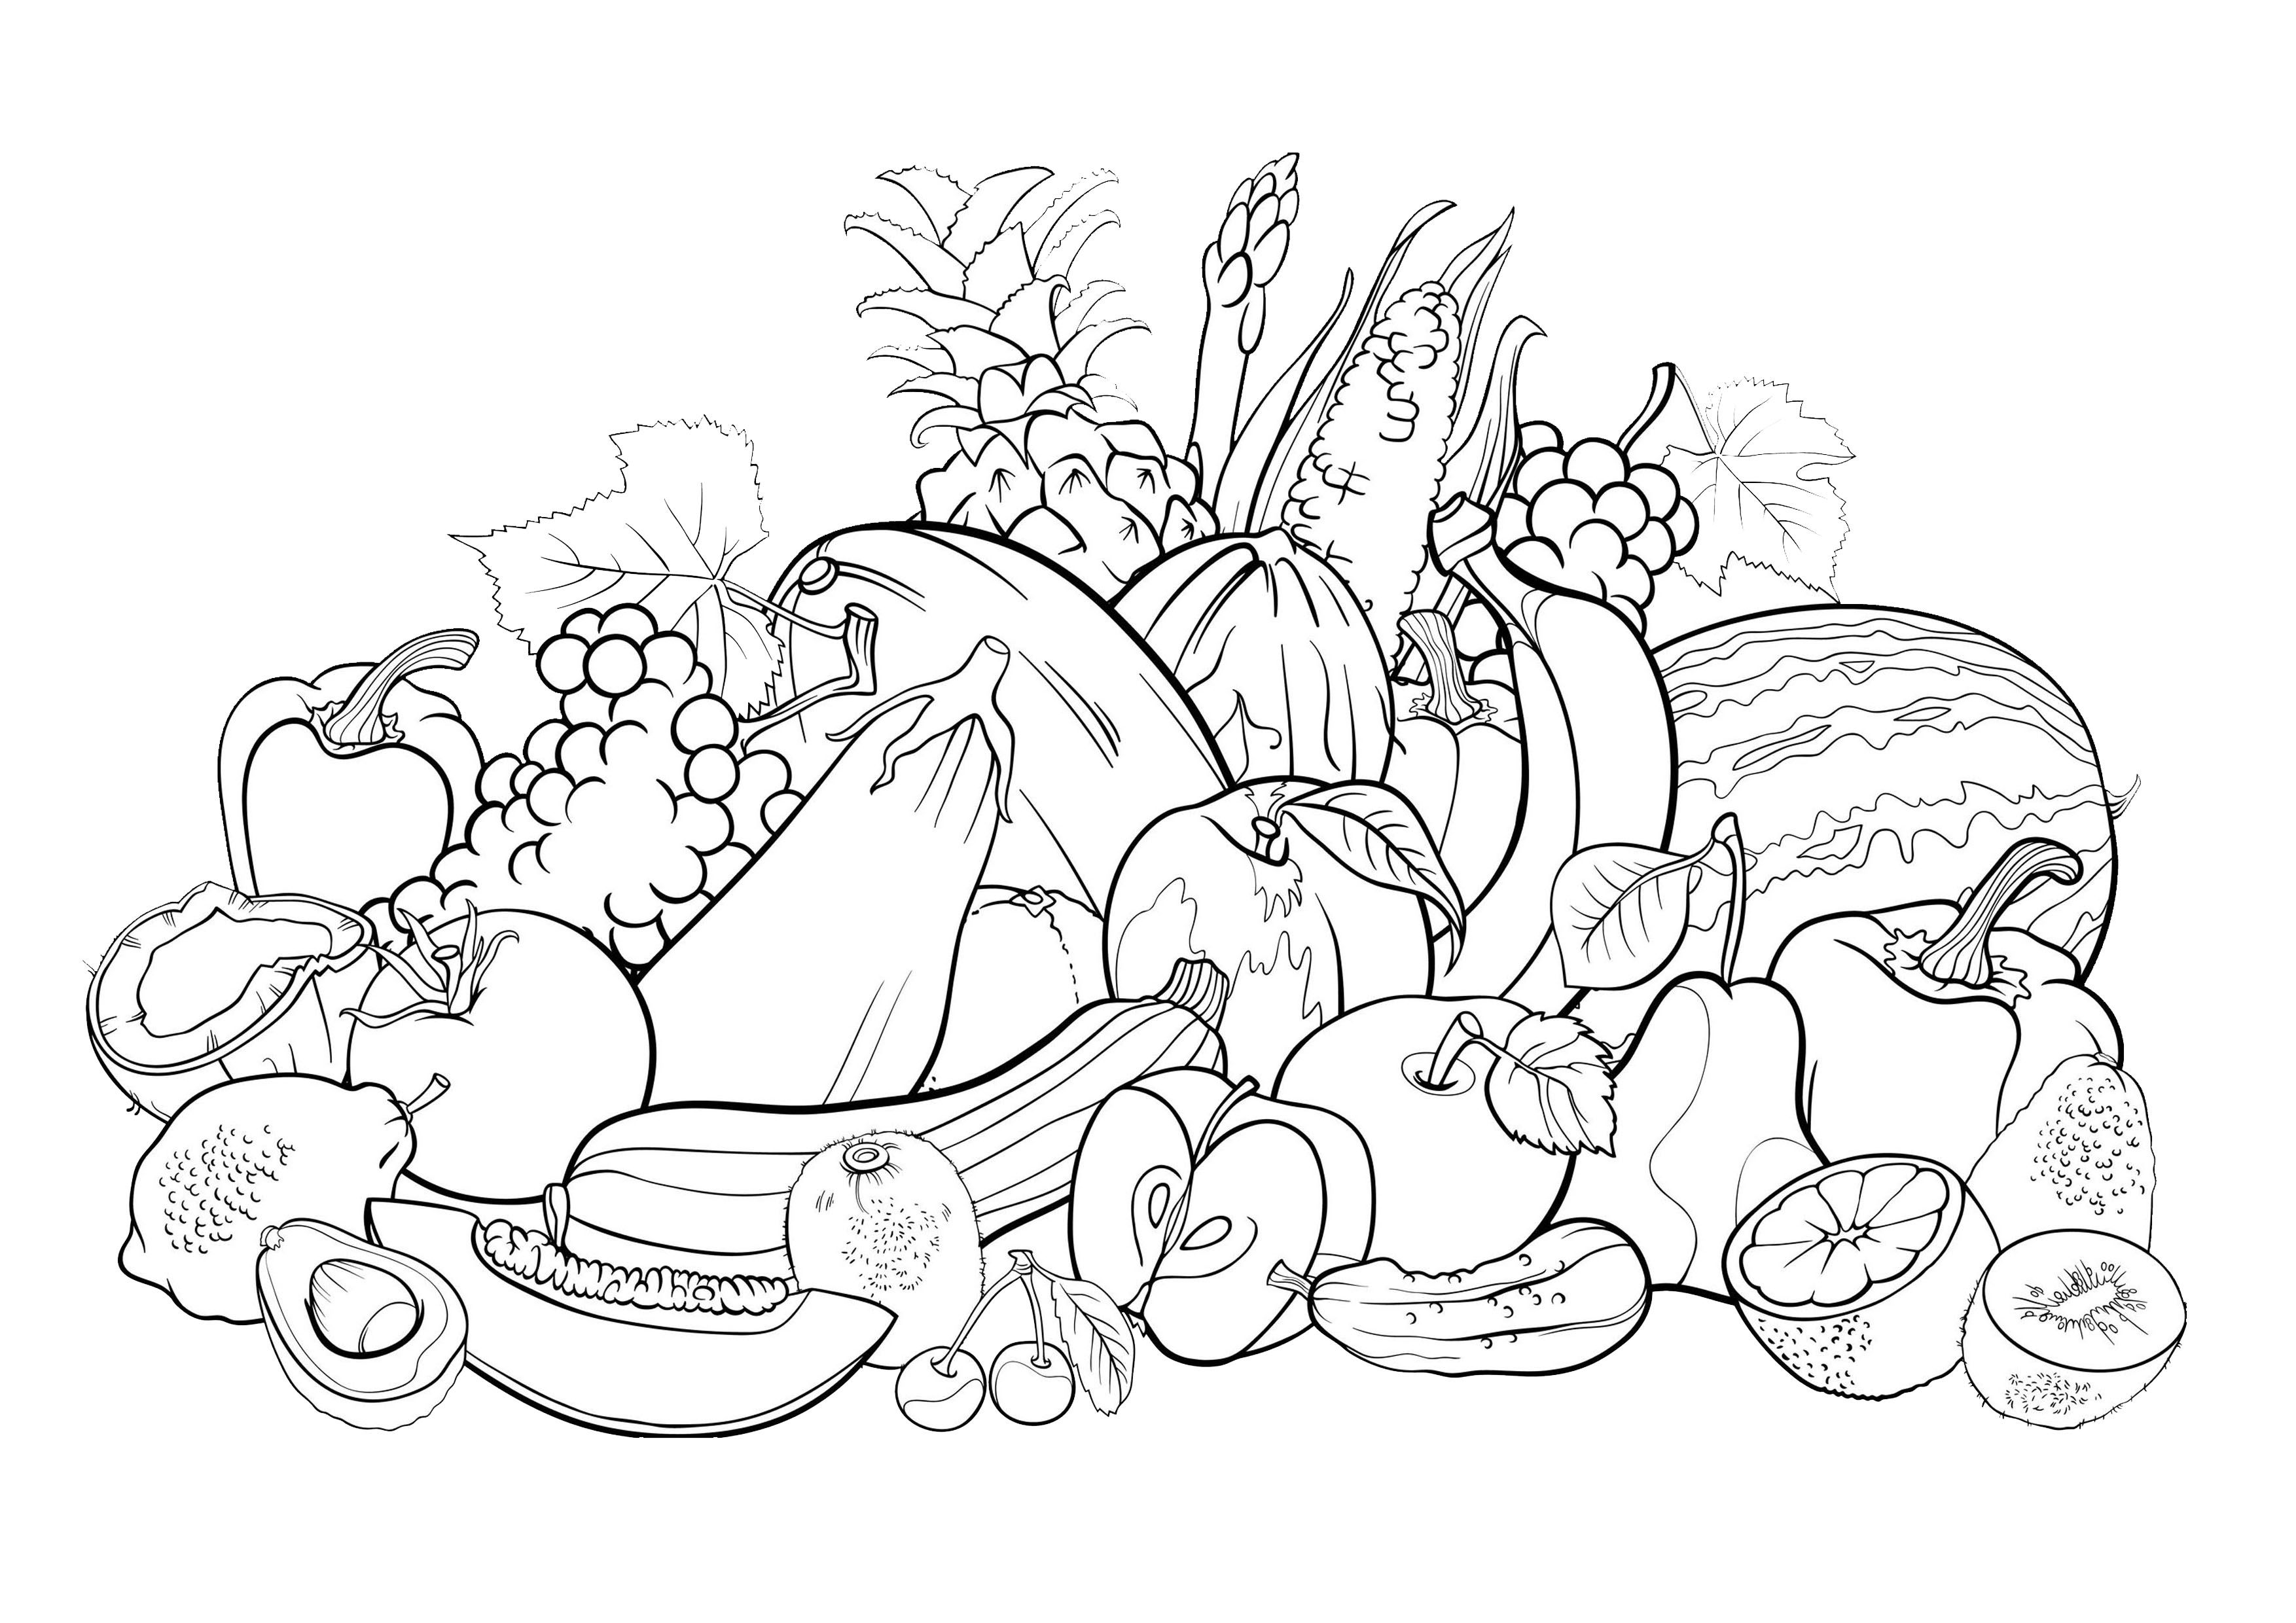 Flower and vegetation - Coloring Pages for adults